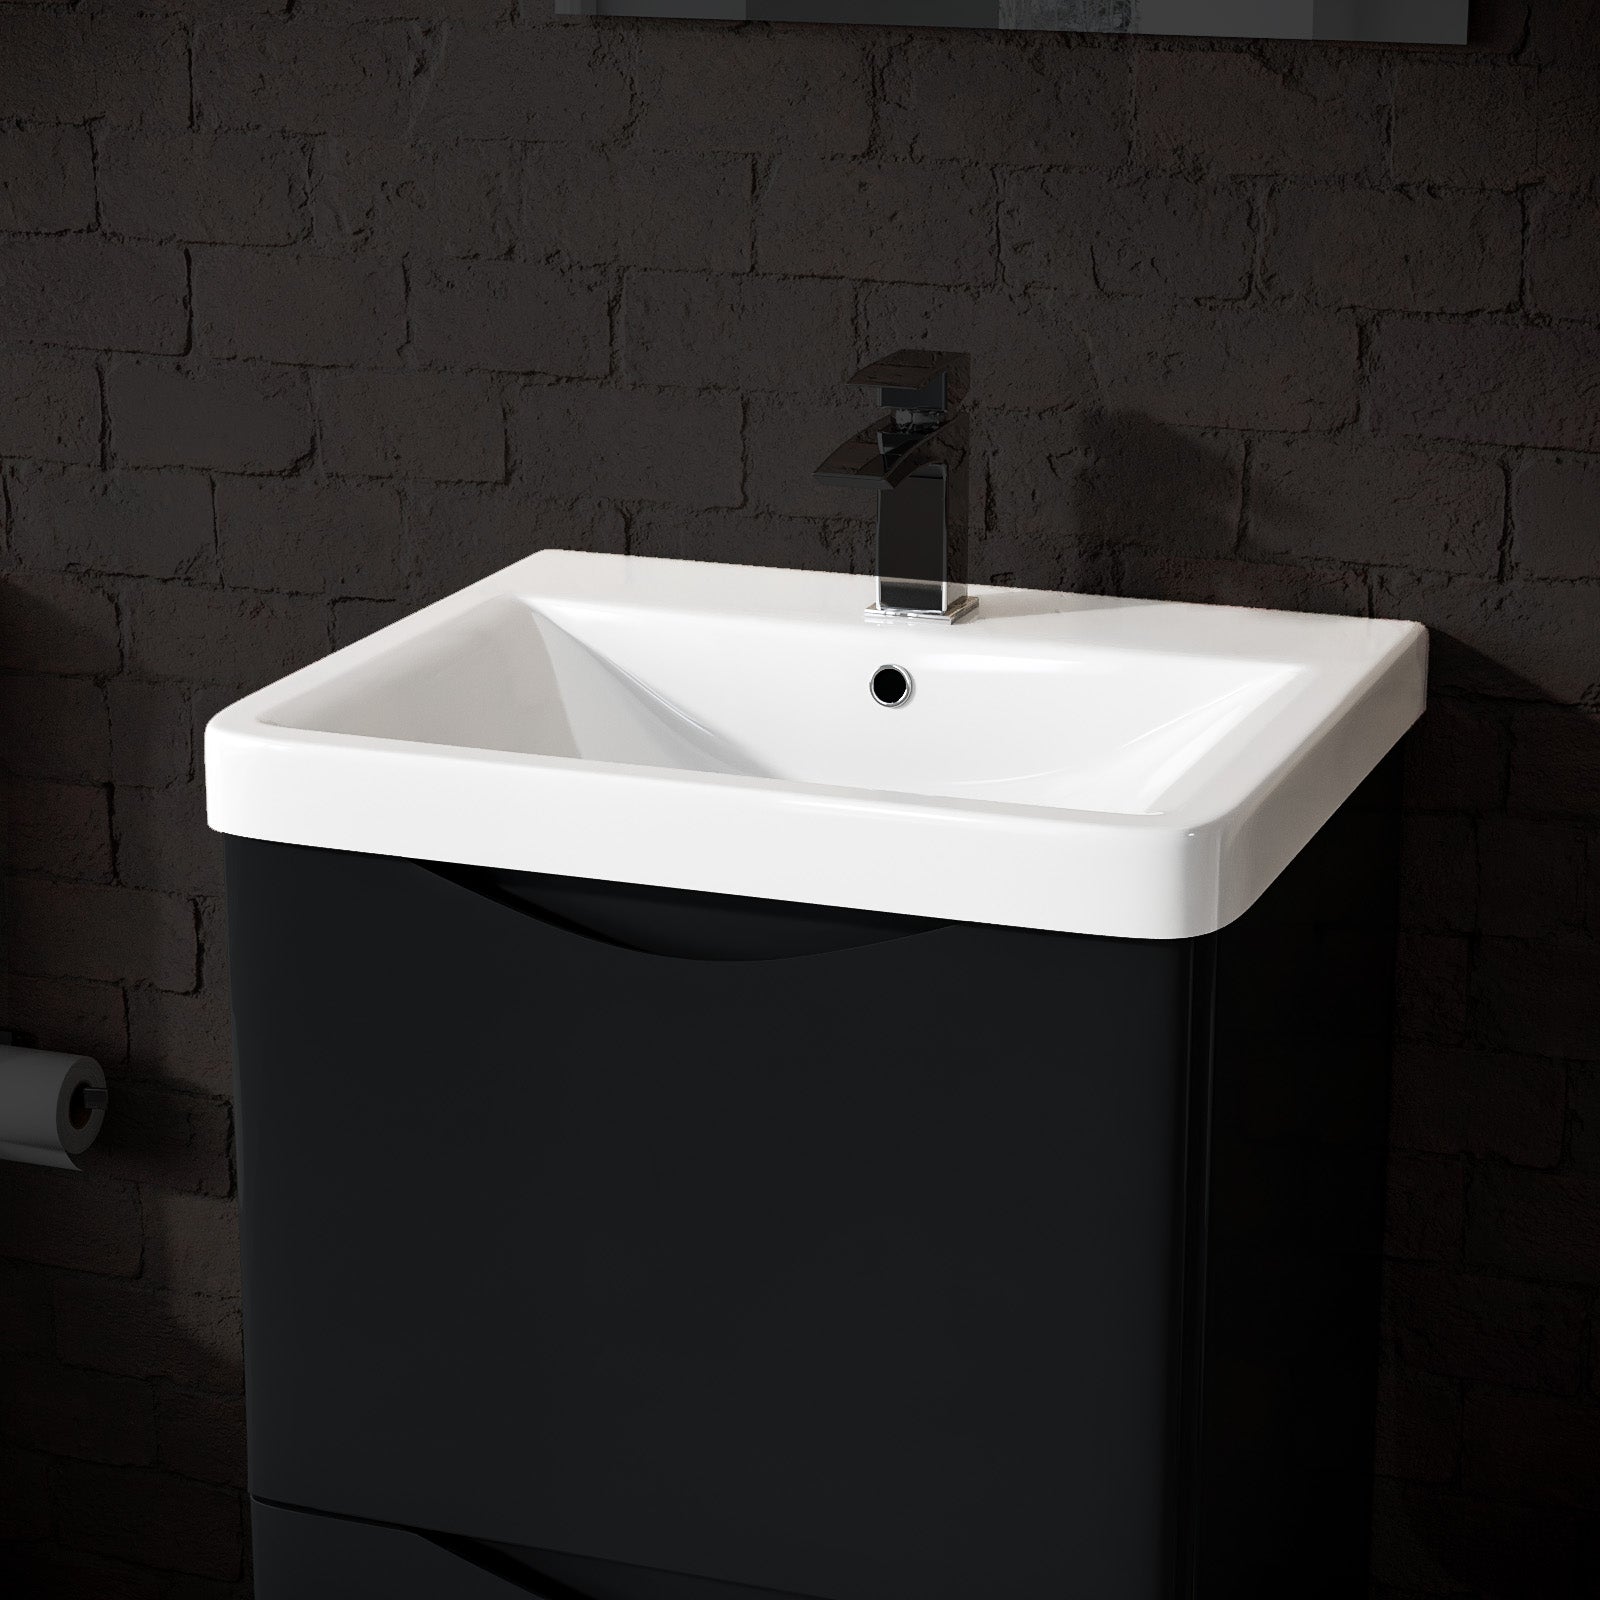 Merton 500mm Cloakroom Countertop Rectangular Basin Sink White with 1 Tap Hole